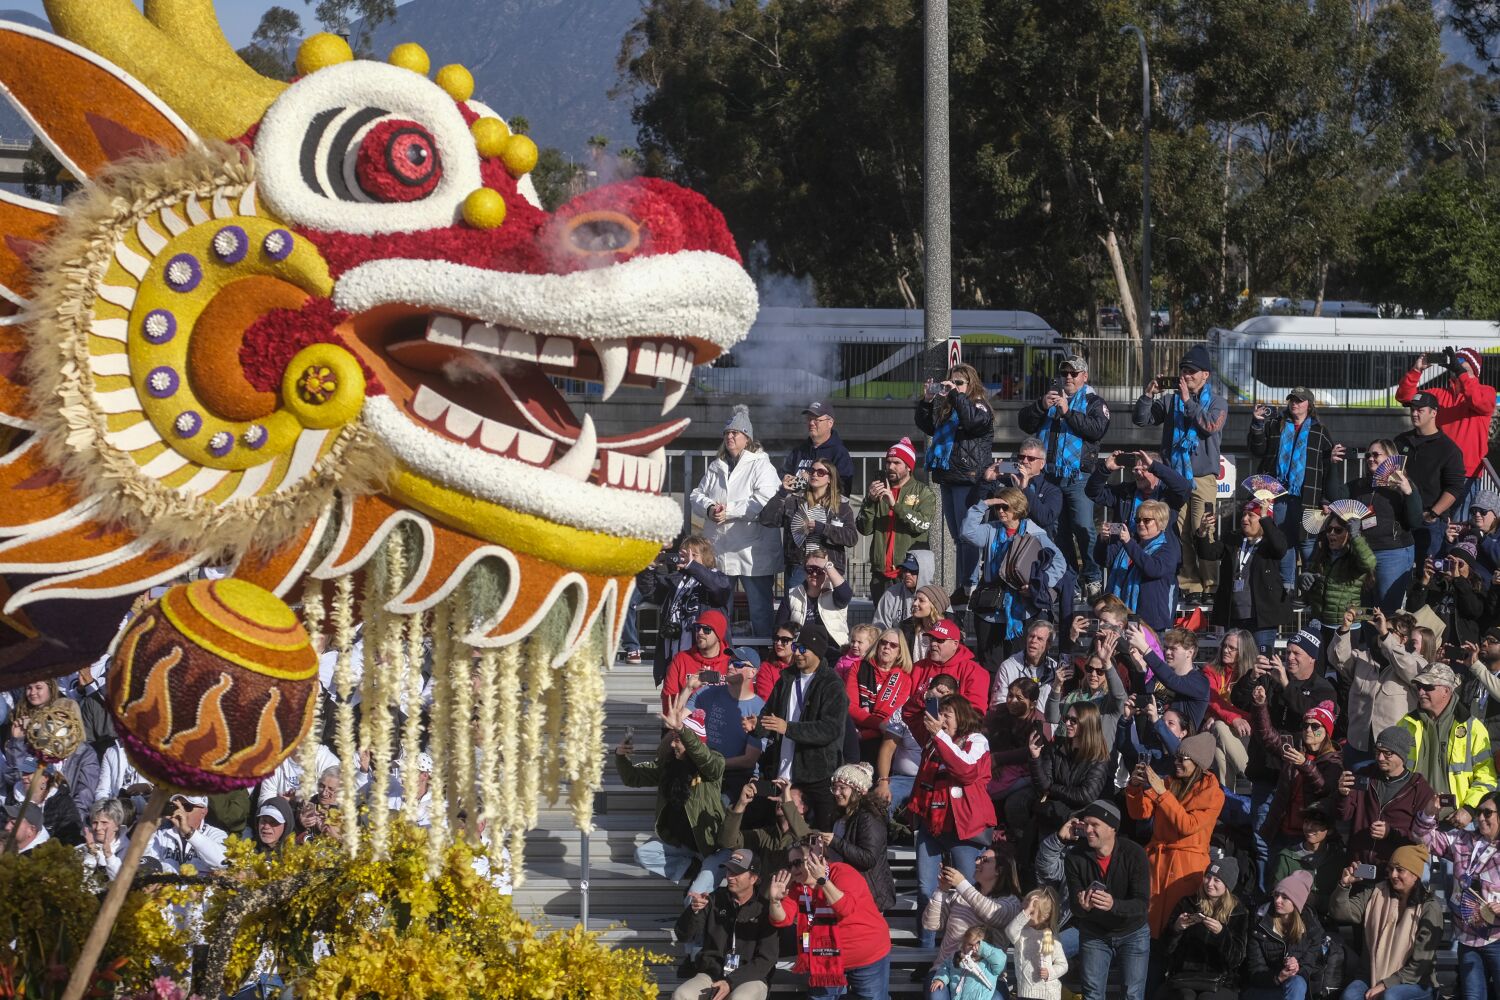 Floats from this year's Rose Parade on display in Pasadena